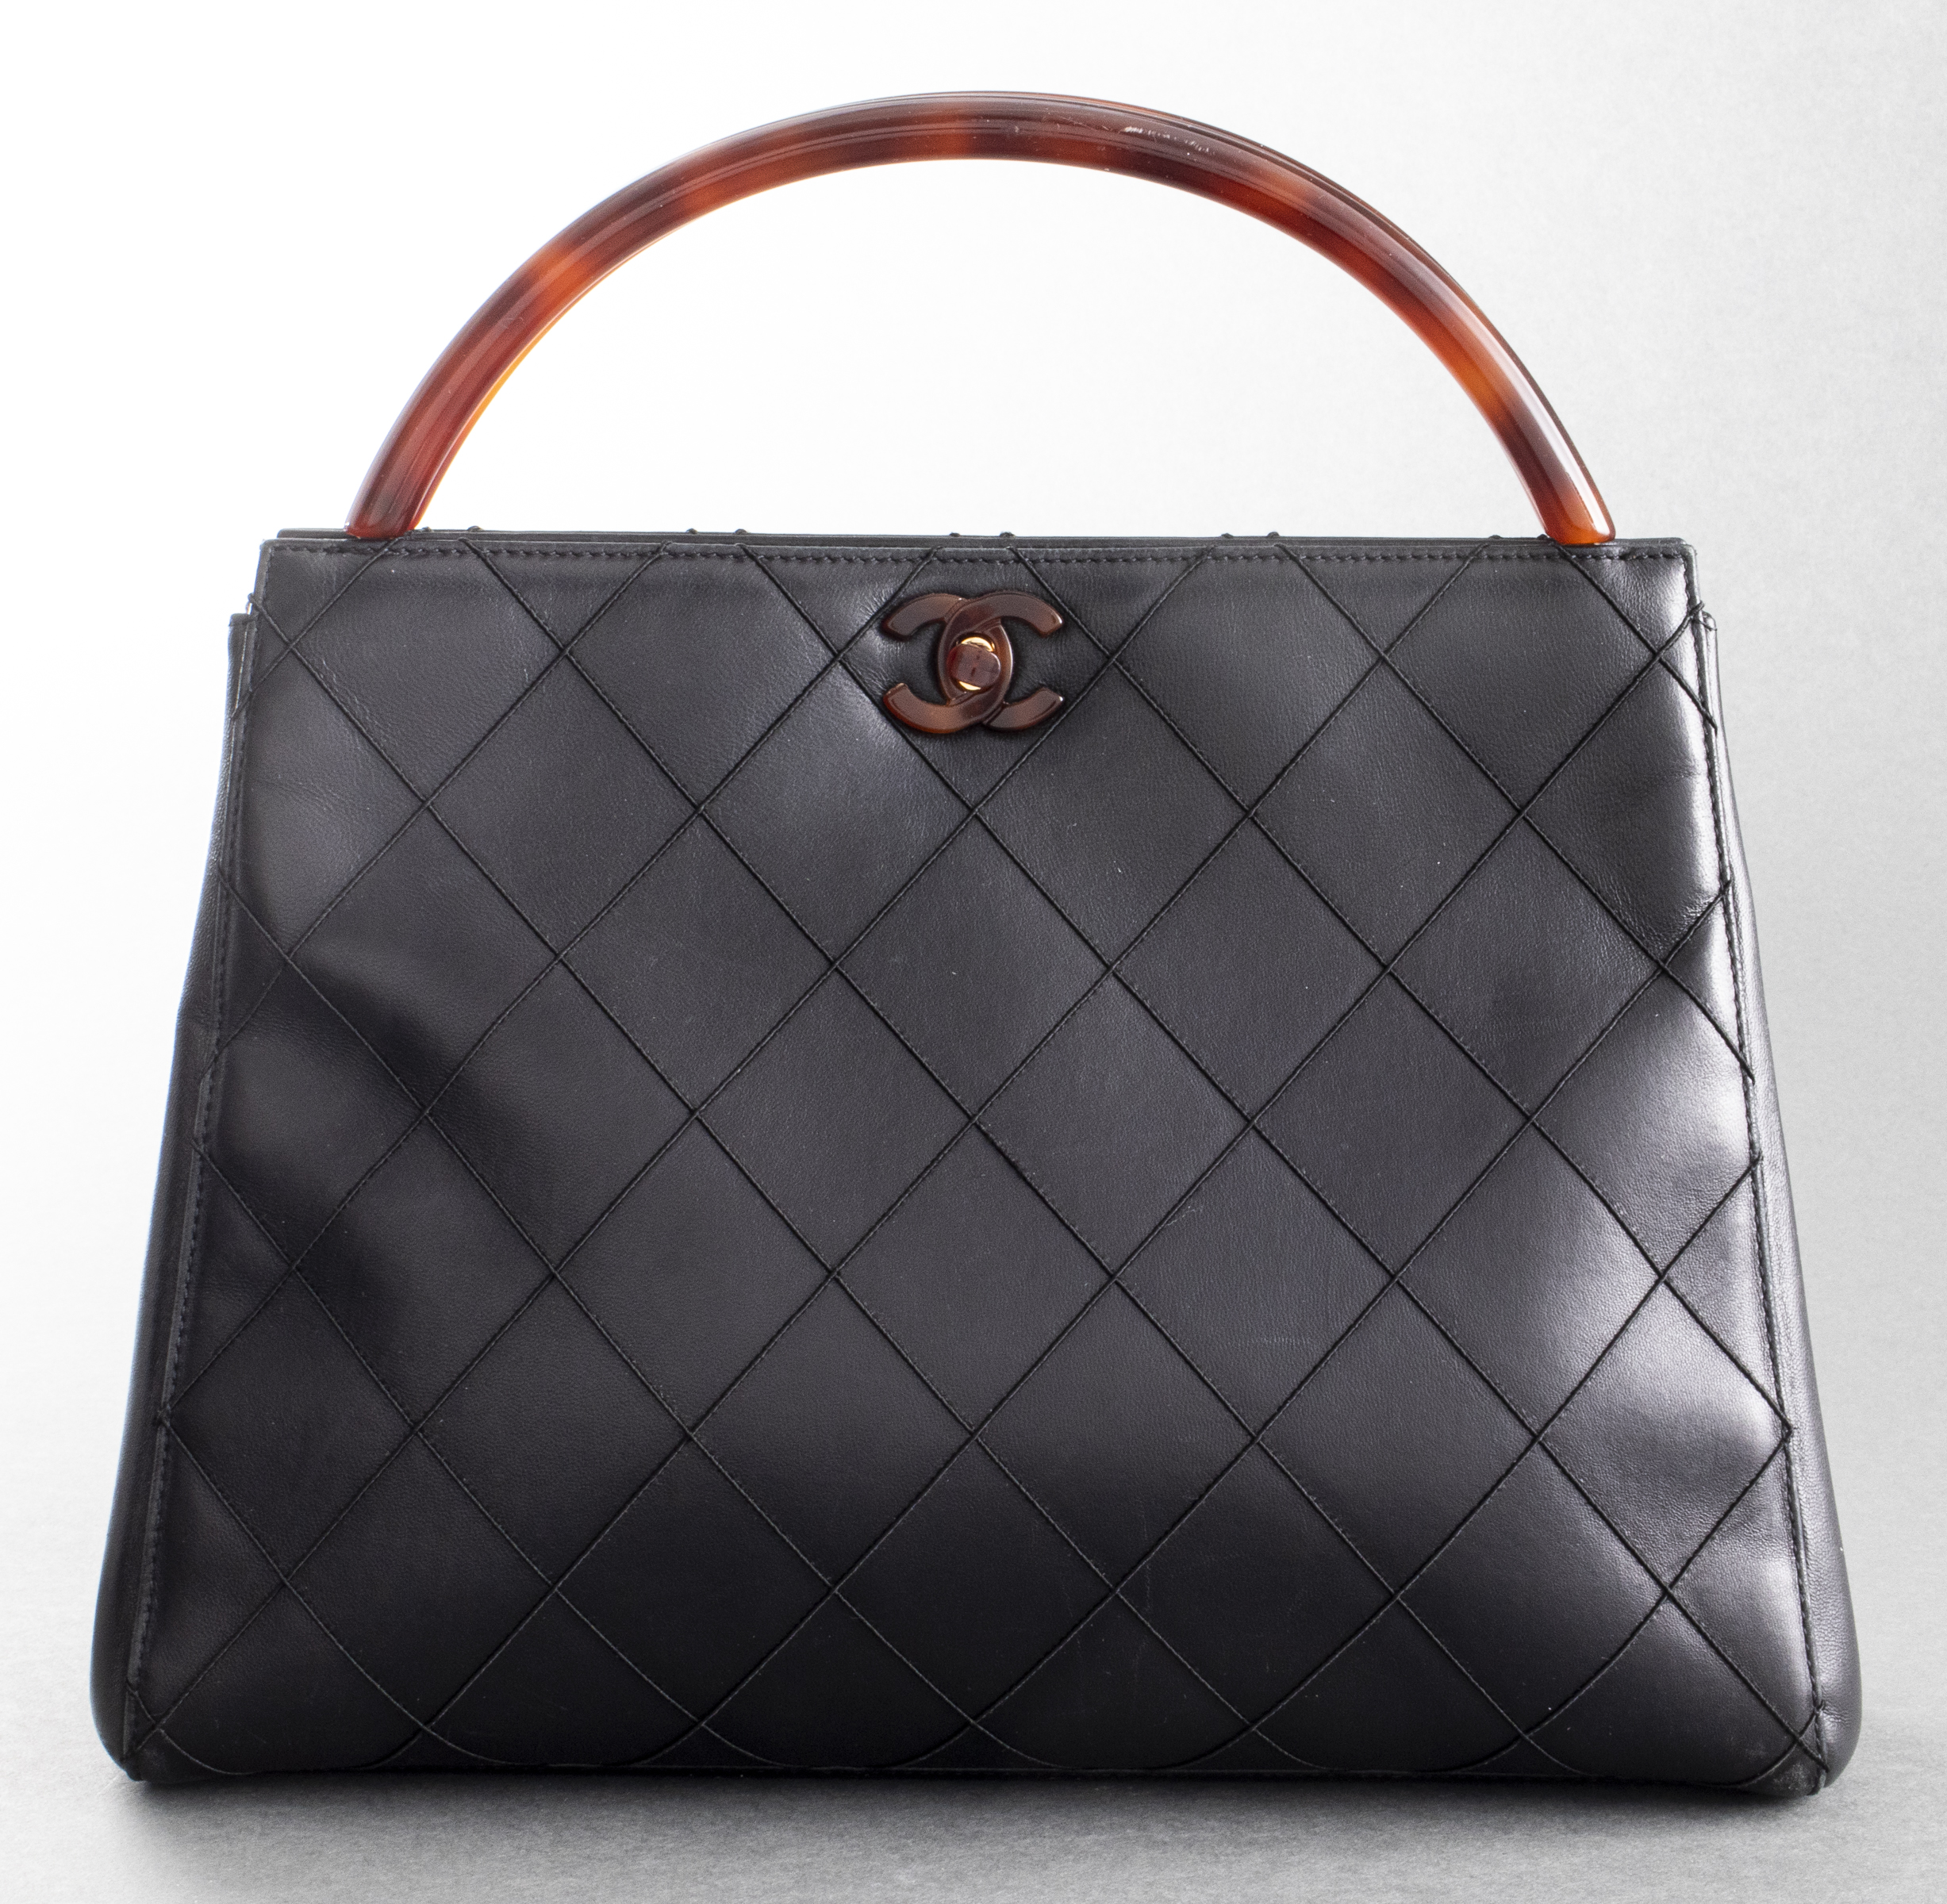 CHANEL BLACK QUILTED LEATHER HANDBAG 3c4a36